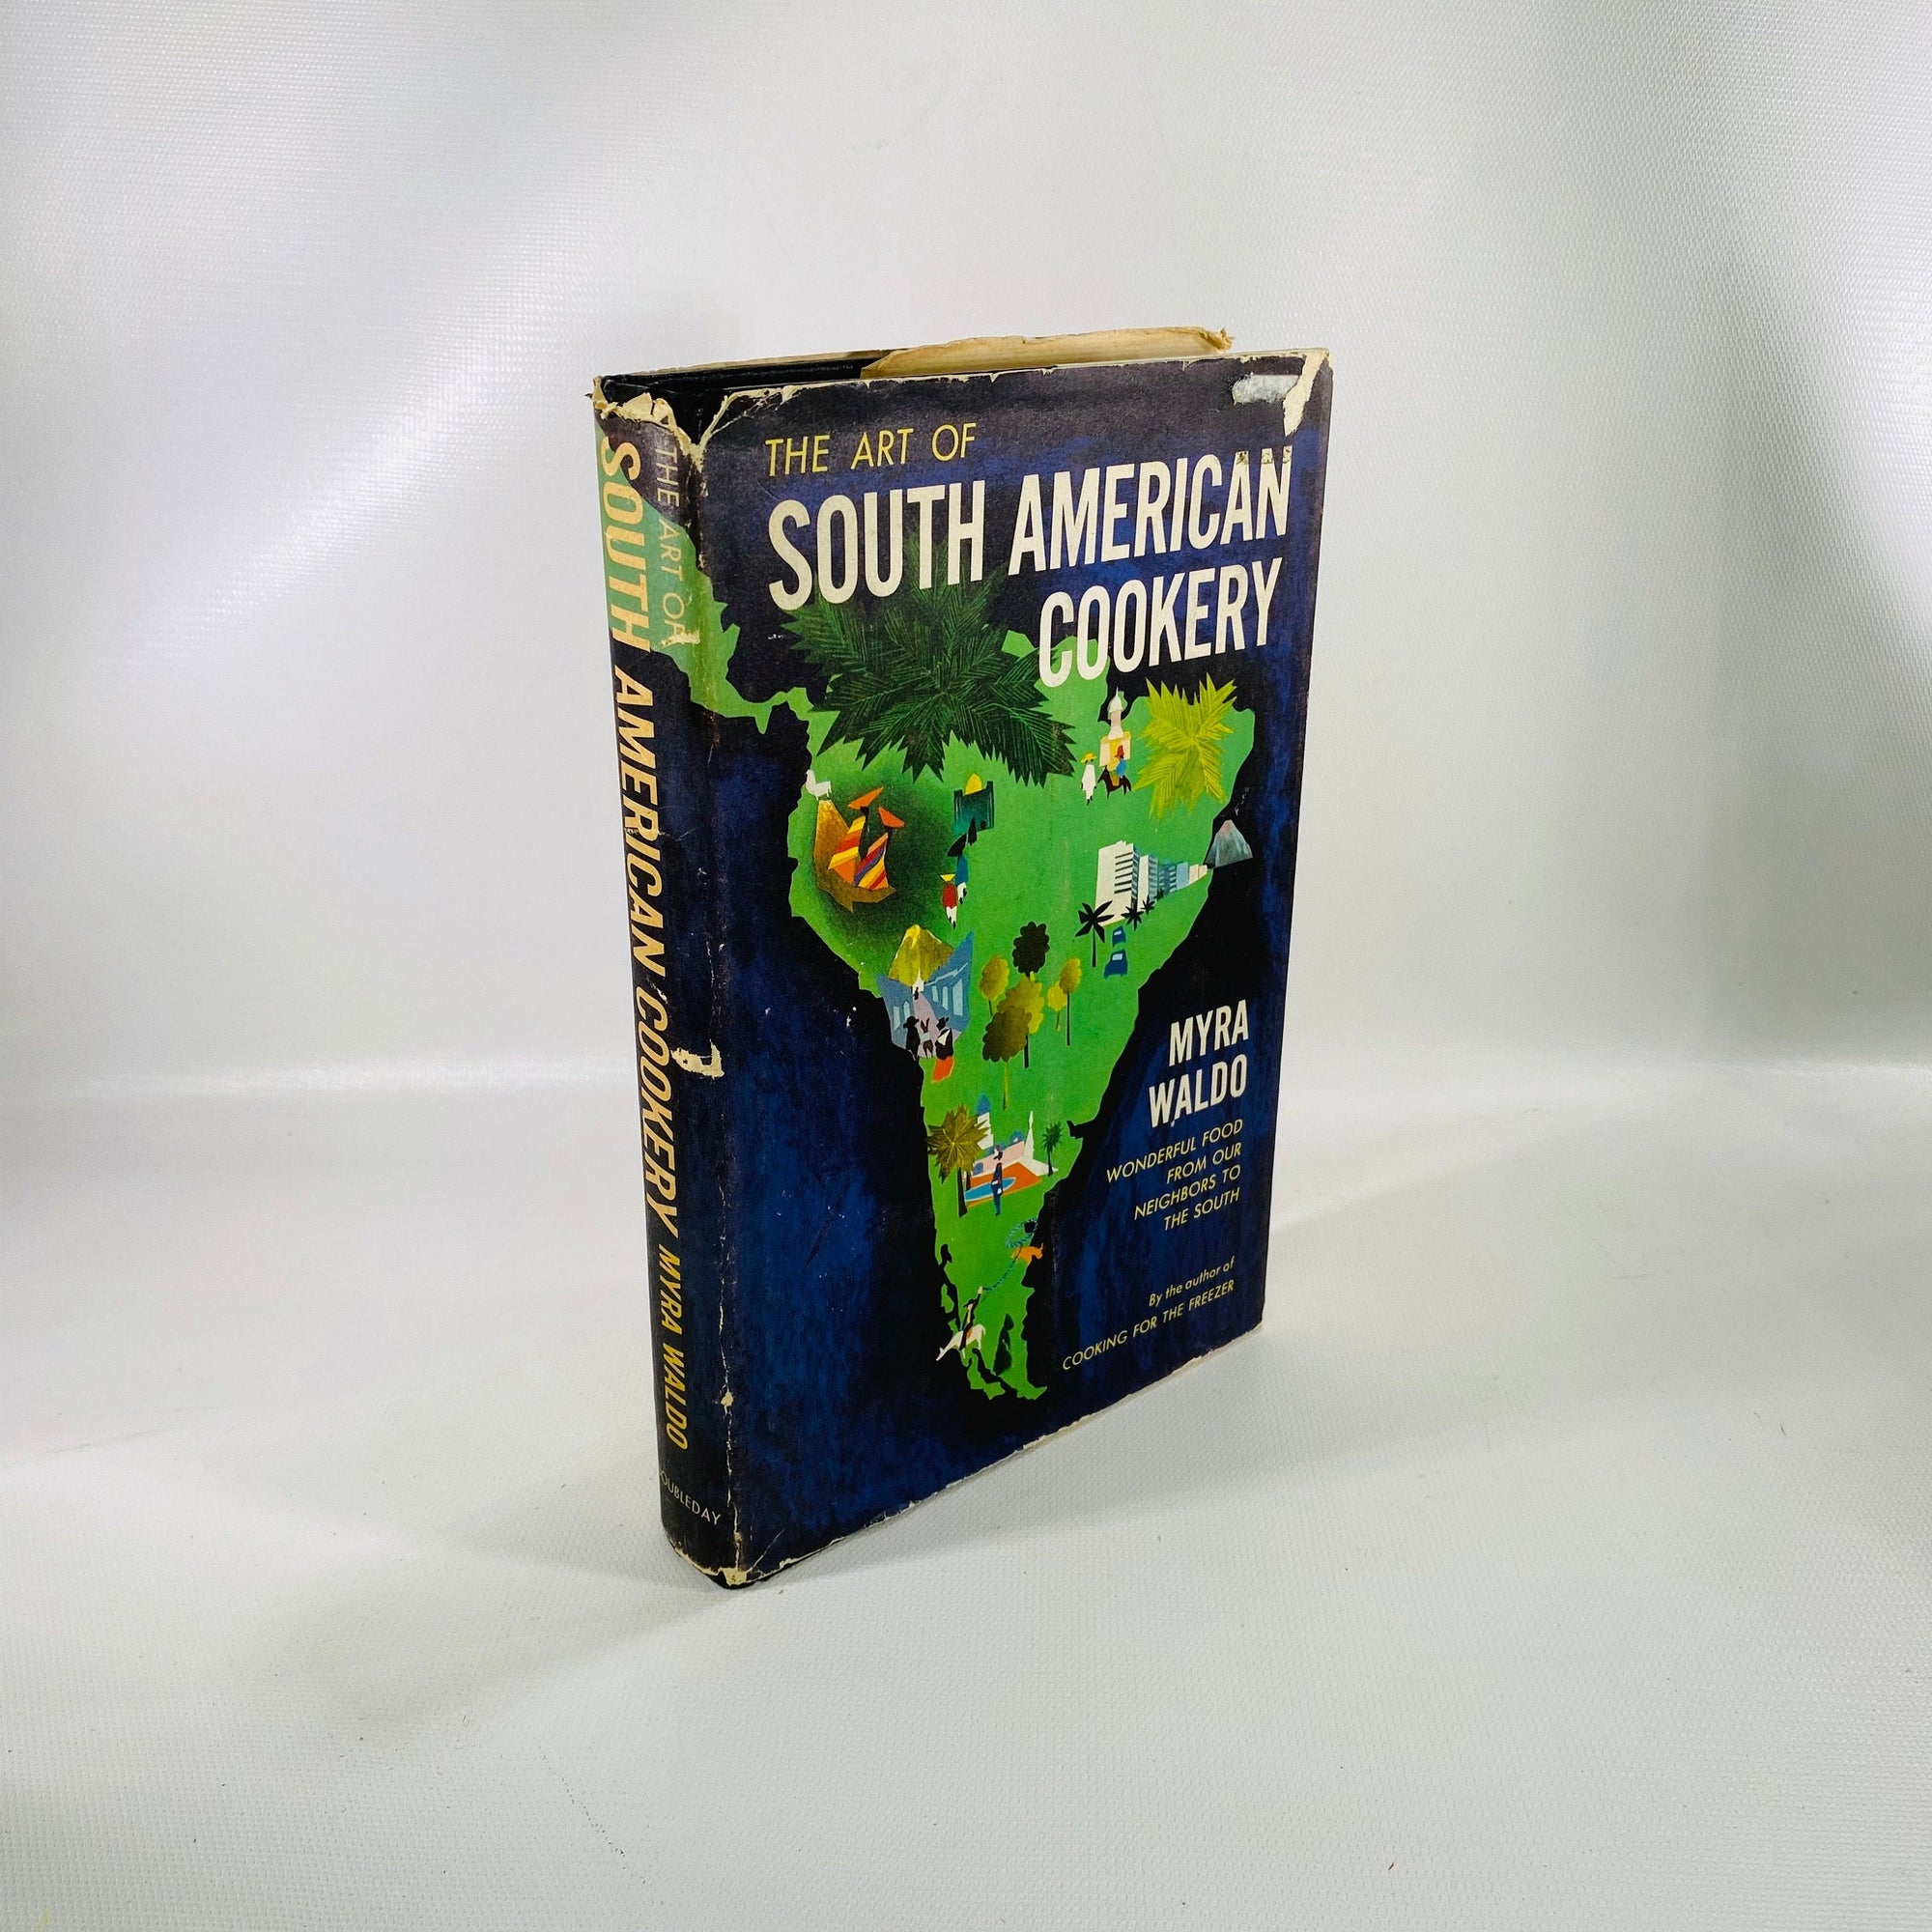 The Art of South American Cookery by Myra Waldo 1961 Vintage Book